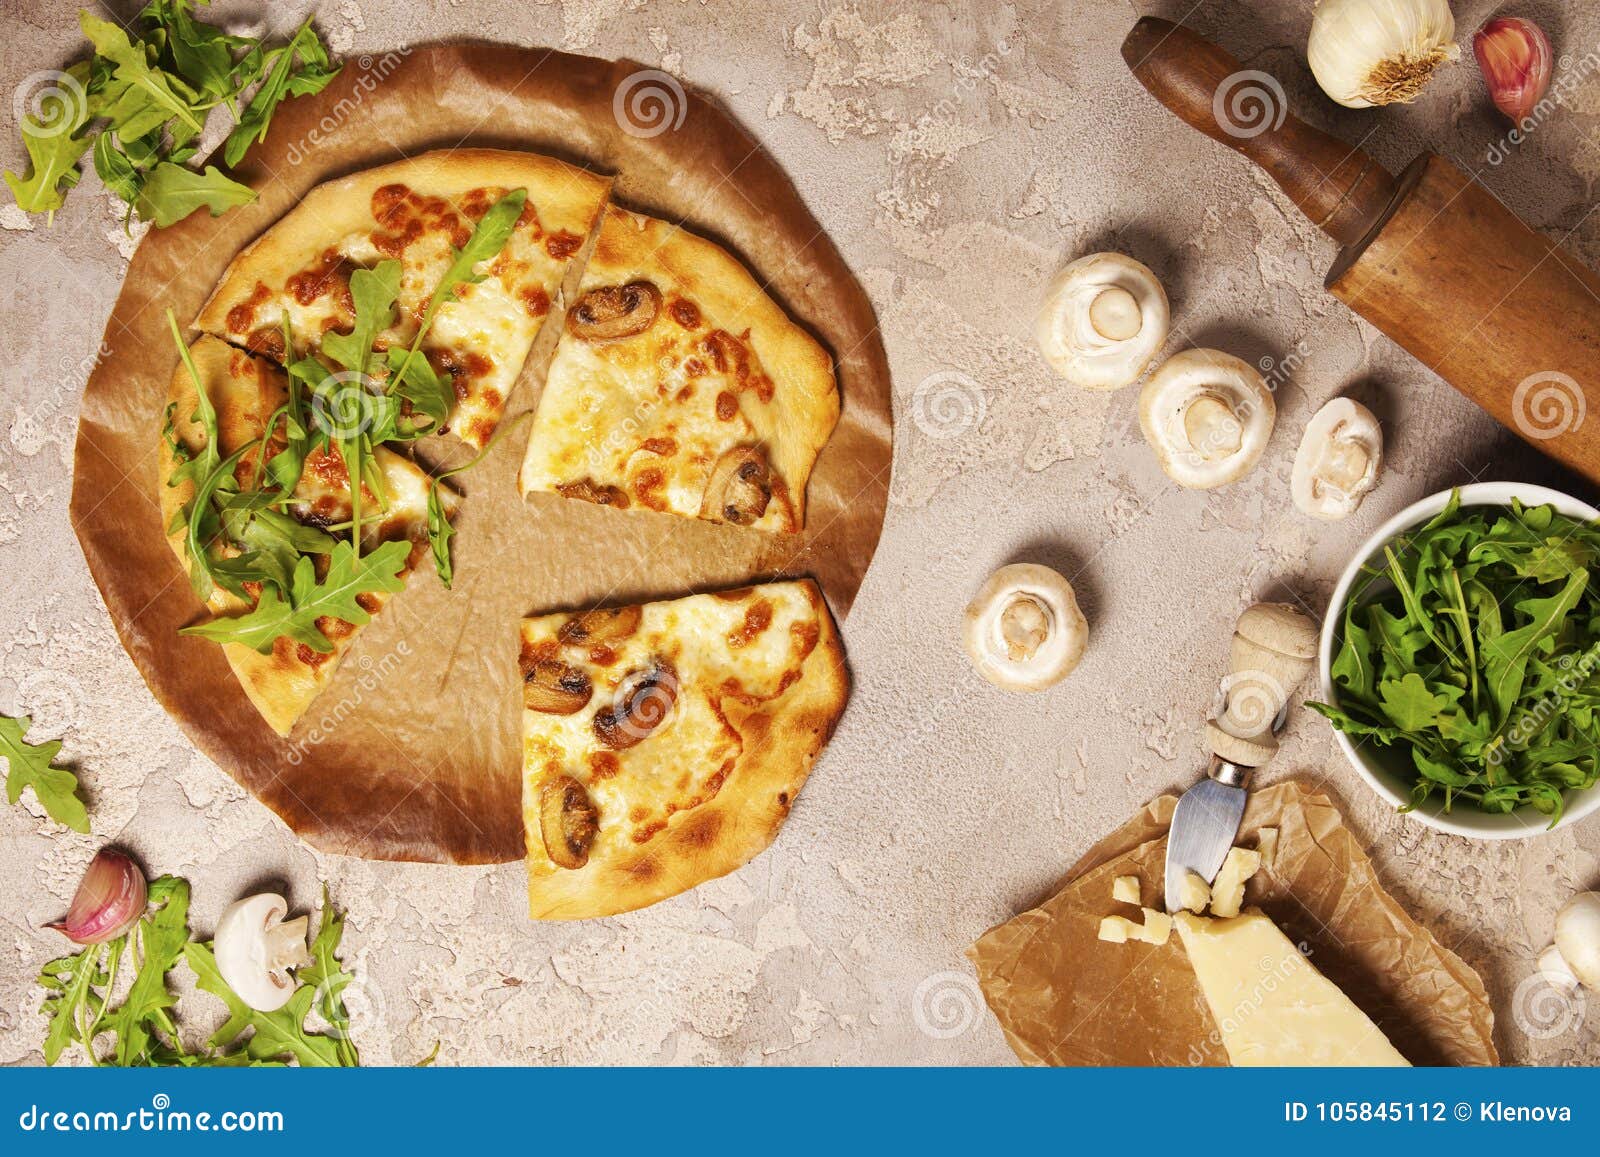 Pizza on Old Stone Background Stock Photo - Image of italy, homemade ...